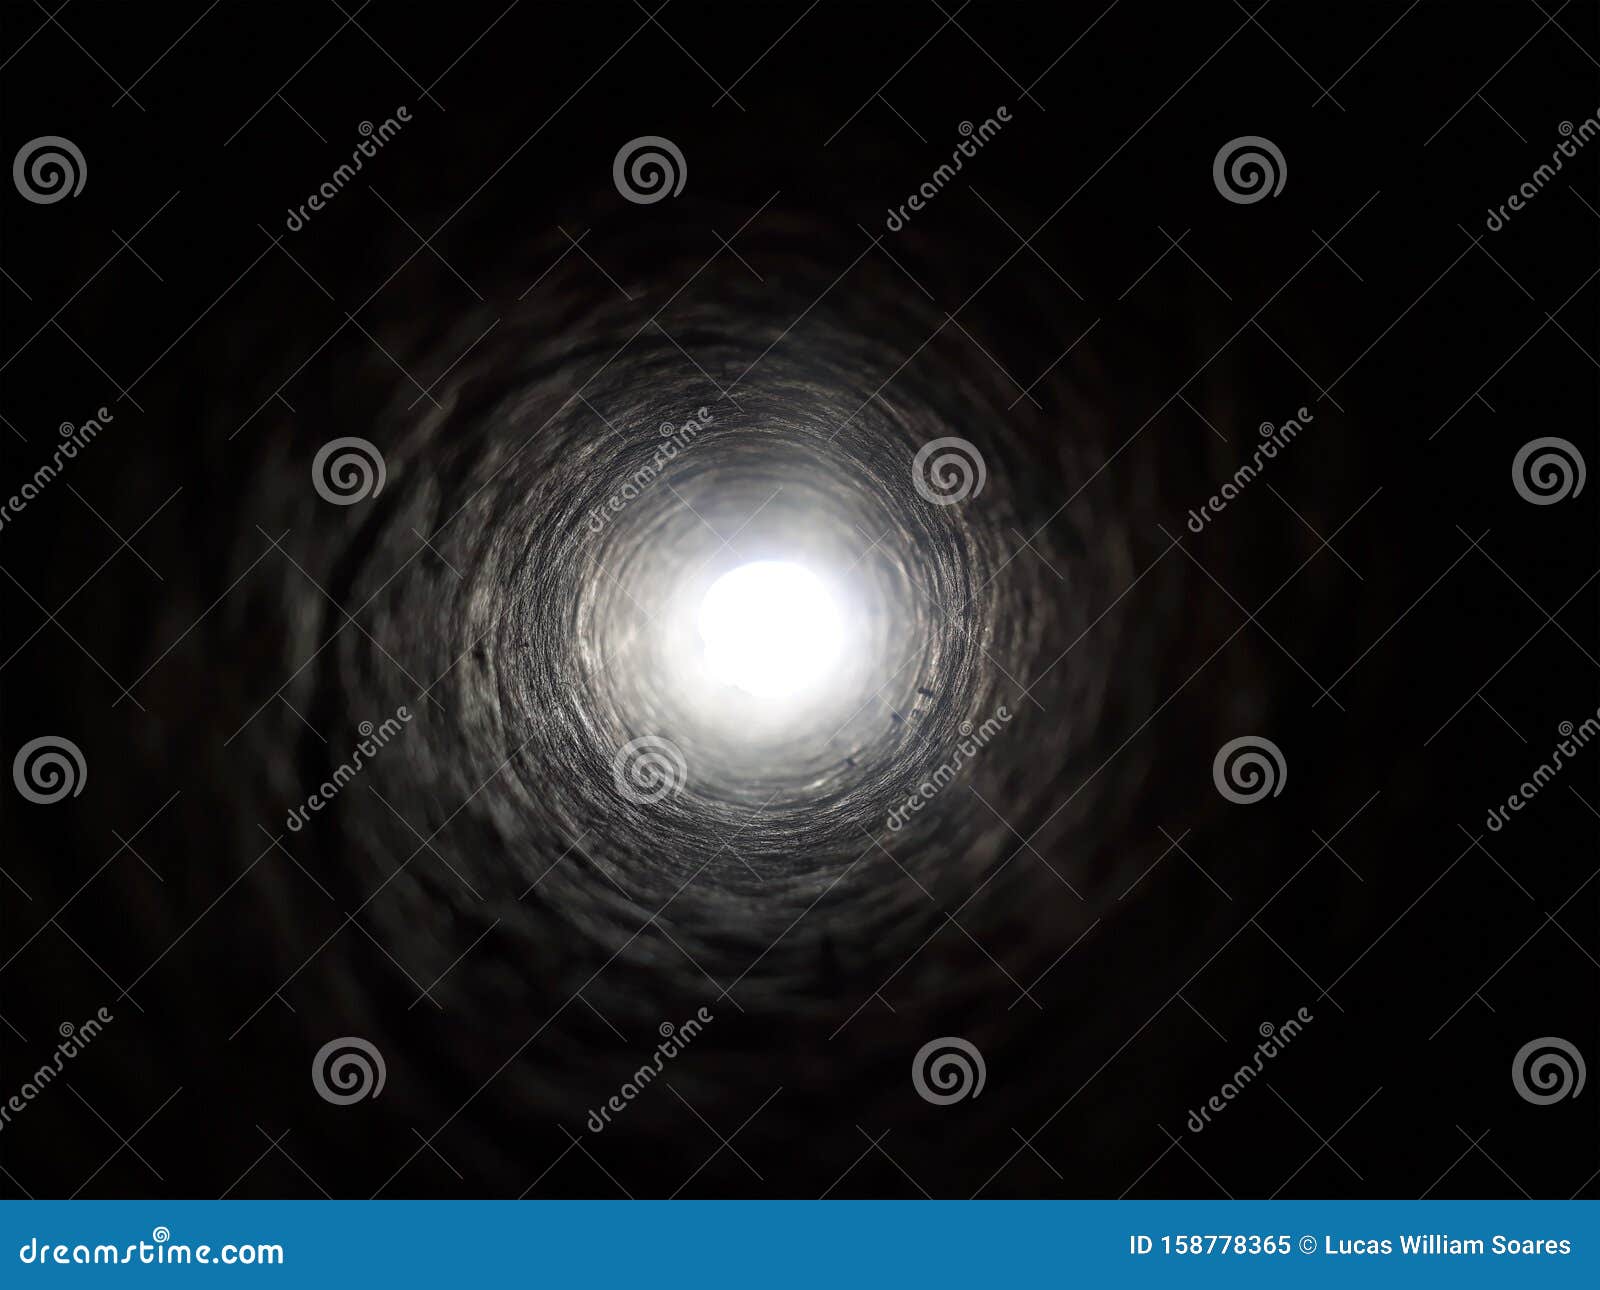 black tunnel with light in the end, background. dark toward light. abstract of light at the end tunnel.